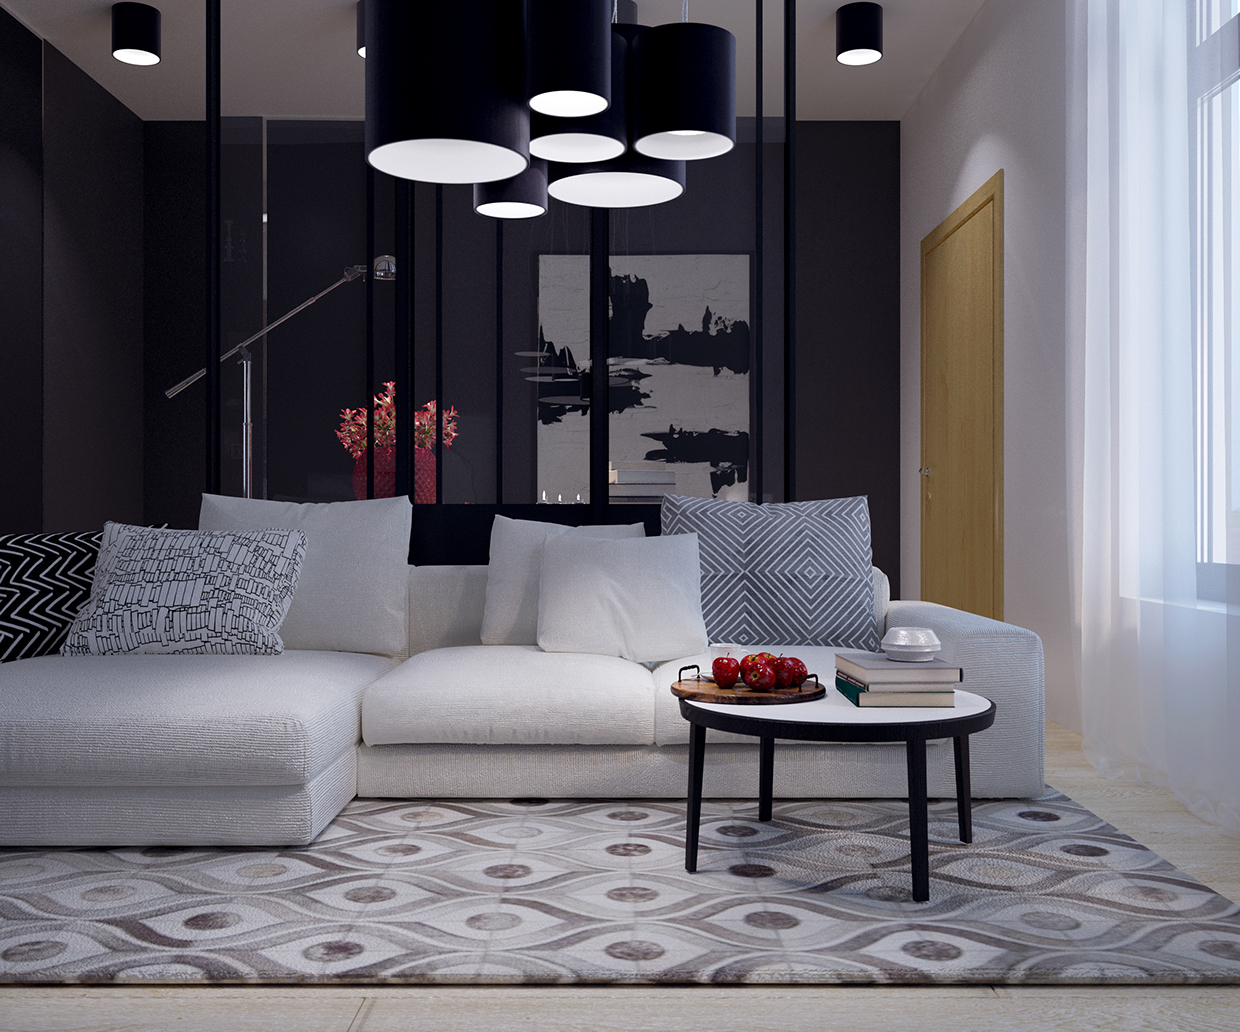 Living room with pendant lamp "width =" 1240 "height =" 1032 "srcset =" https://mileray.com/wp-content/uploads/2020/05/1588517318_360_Living-Room-Decorating-Ideas-With-Minimalist-Design.jpg 1240w, https: // myfashionos. com / wp-content / uploads / 2016/08 / Zinaida-Baklanova2-300x250.jpg 300w, https://mileray.com/wp-content/uploads/2016/08/Zinaida-Baklanova2-768x639.jpg 768w, https: //mileray.com/wp-content/uploads/2016/08/Zinaida-Baklanova2-1024x852.jpg 1024w, https://mileray.com/wp-content/uploads/2016/08/Zinaida-Baklanova2-696x579.jpg 696w, https://mileray.com/wp-content/uploads/2016/08/Zinaida-Baklanova2-1068x889.jpg 1068w, https://mileray.com/wp-content/uploads/2016/08/Zinaida-Baklanova2 -505x420.jpg 505w "sizes =" (maximum width: 1240px) 100vw, 1240px